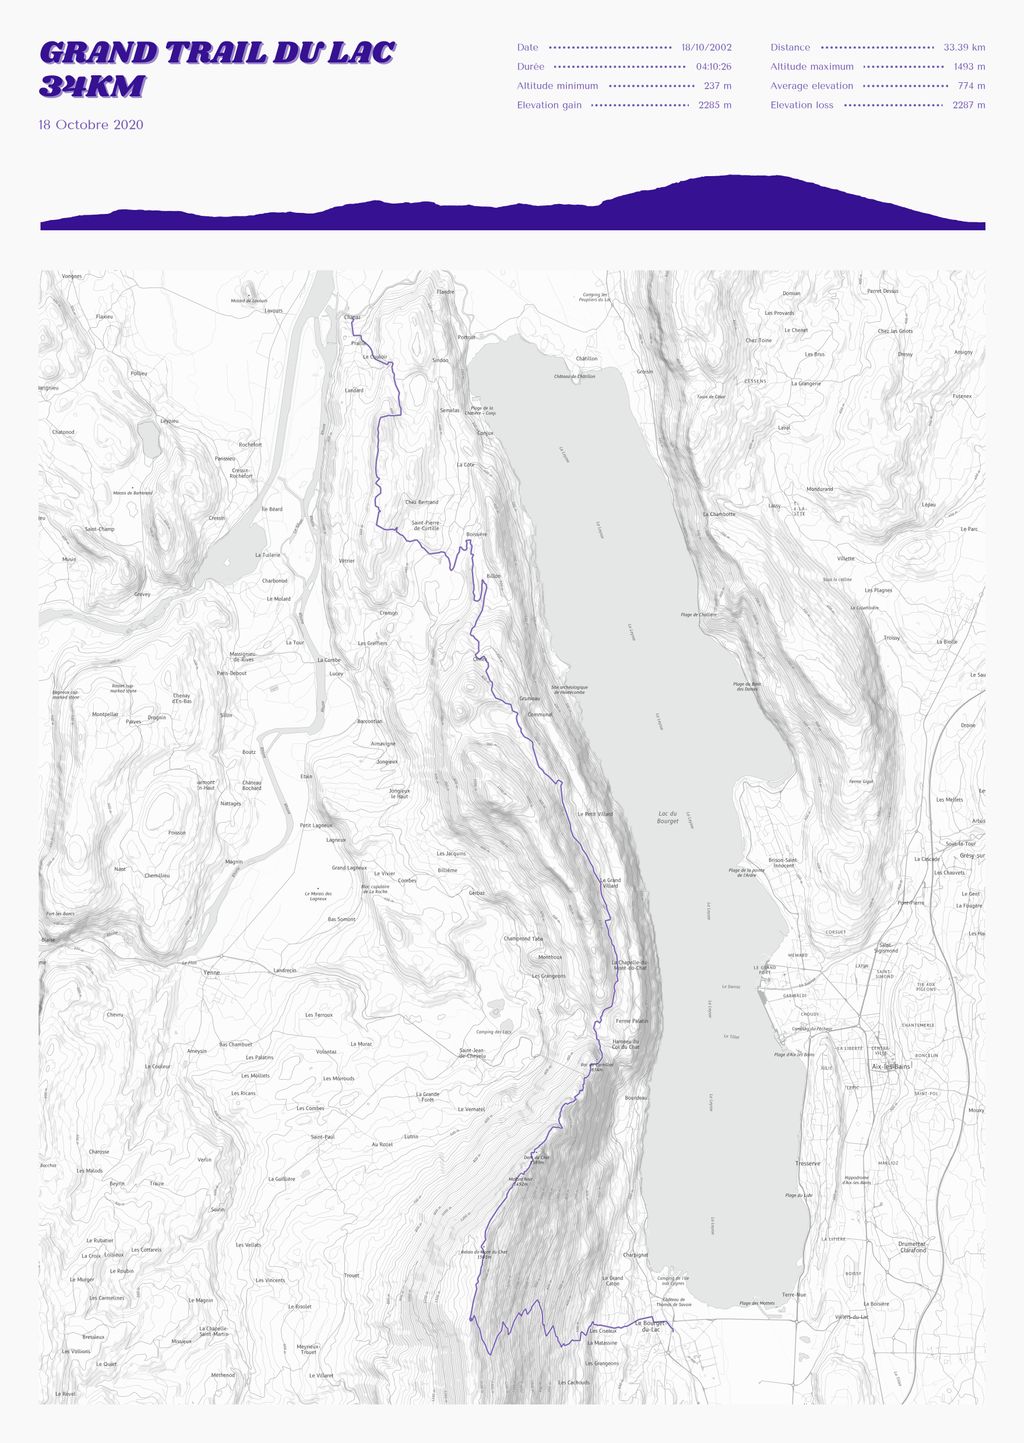 Map poster of the Grand Trail du Lac
34km